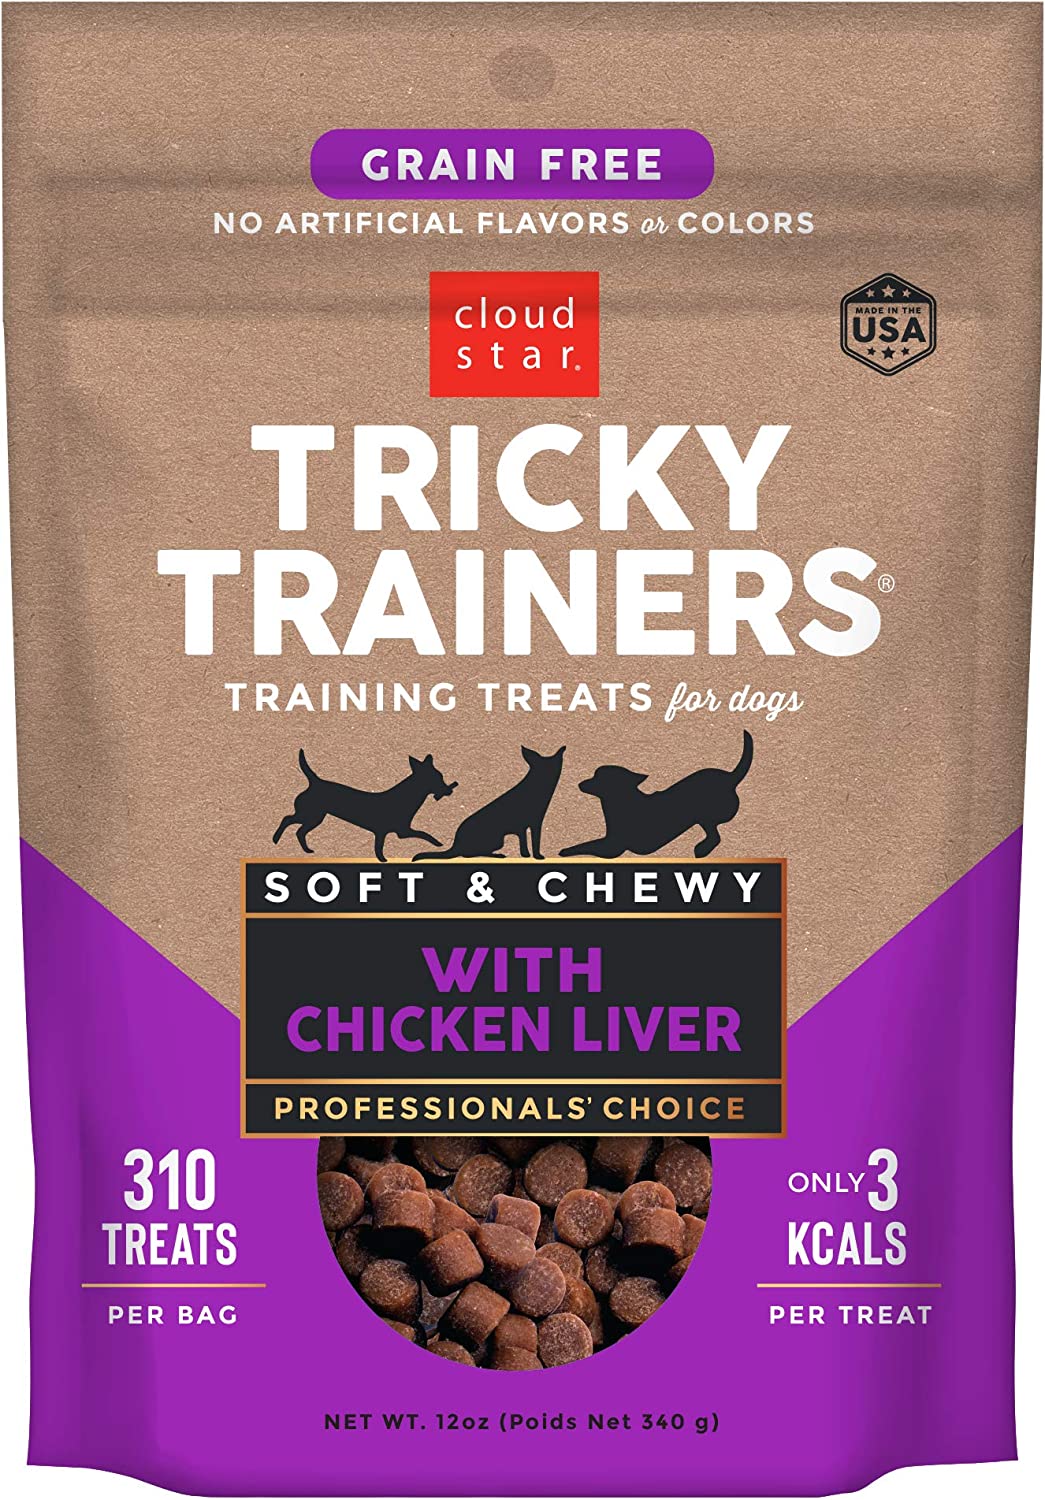 Cloud Star Tricky Trainers Chewy Liver & Grain Free, Low Calorie Dog Training Treats, Baked in the USA (12 oz)